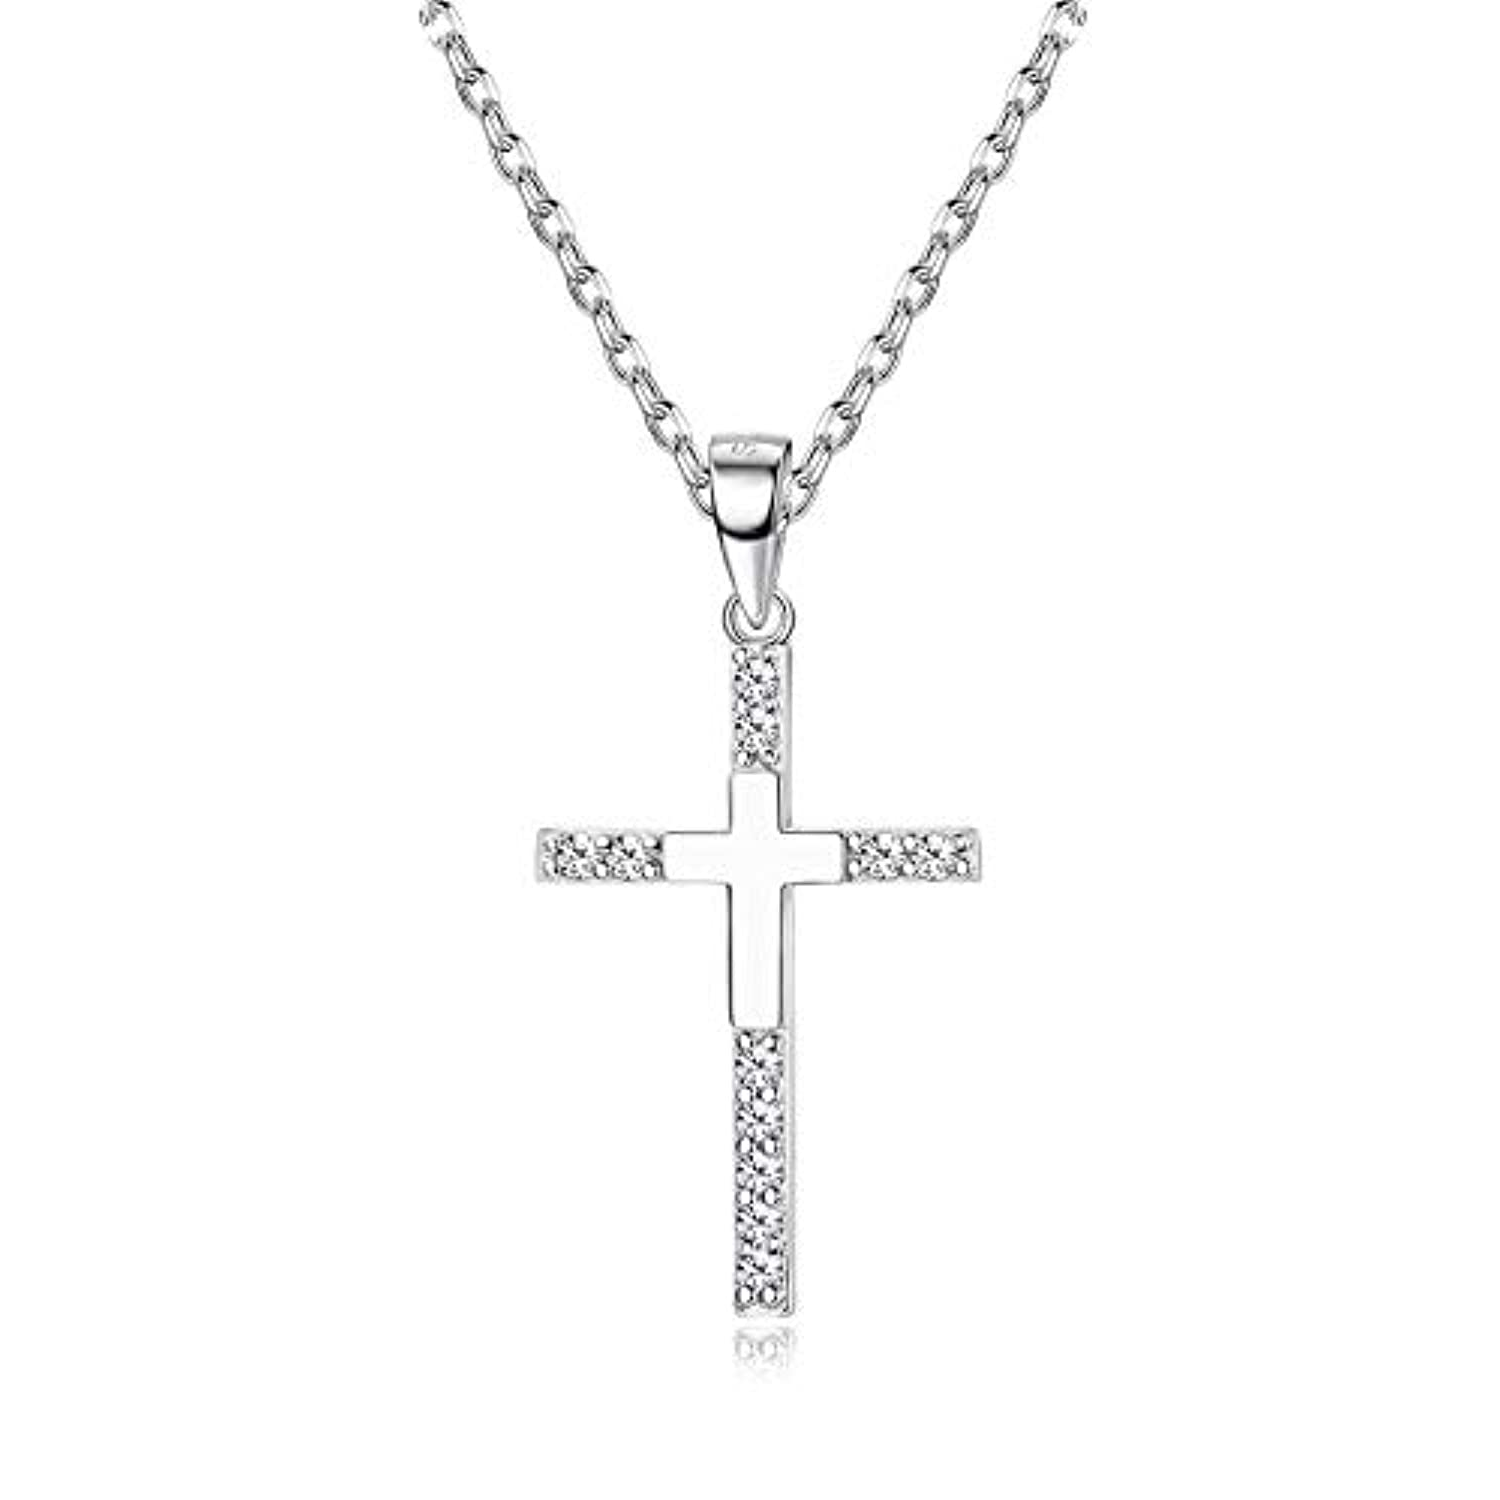 Men's Christian Jewelry Collection for the Modern Believer | Jewelry America